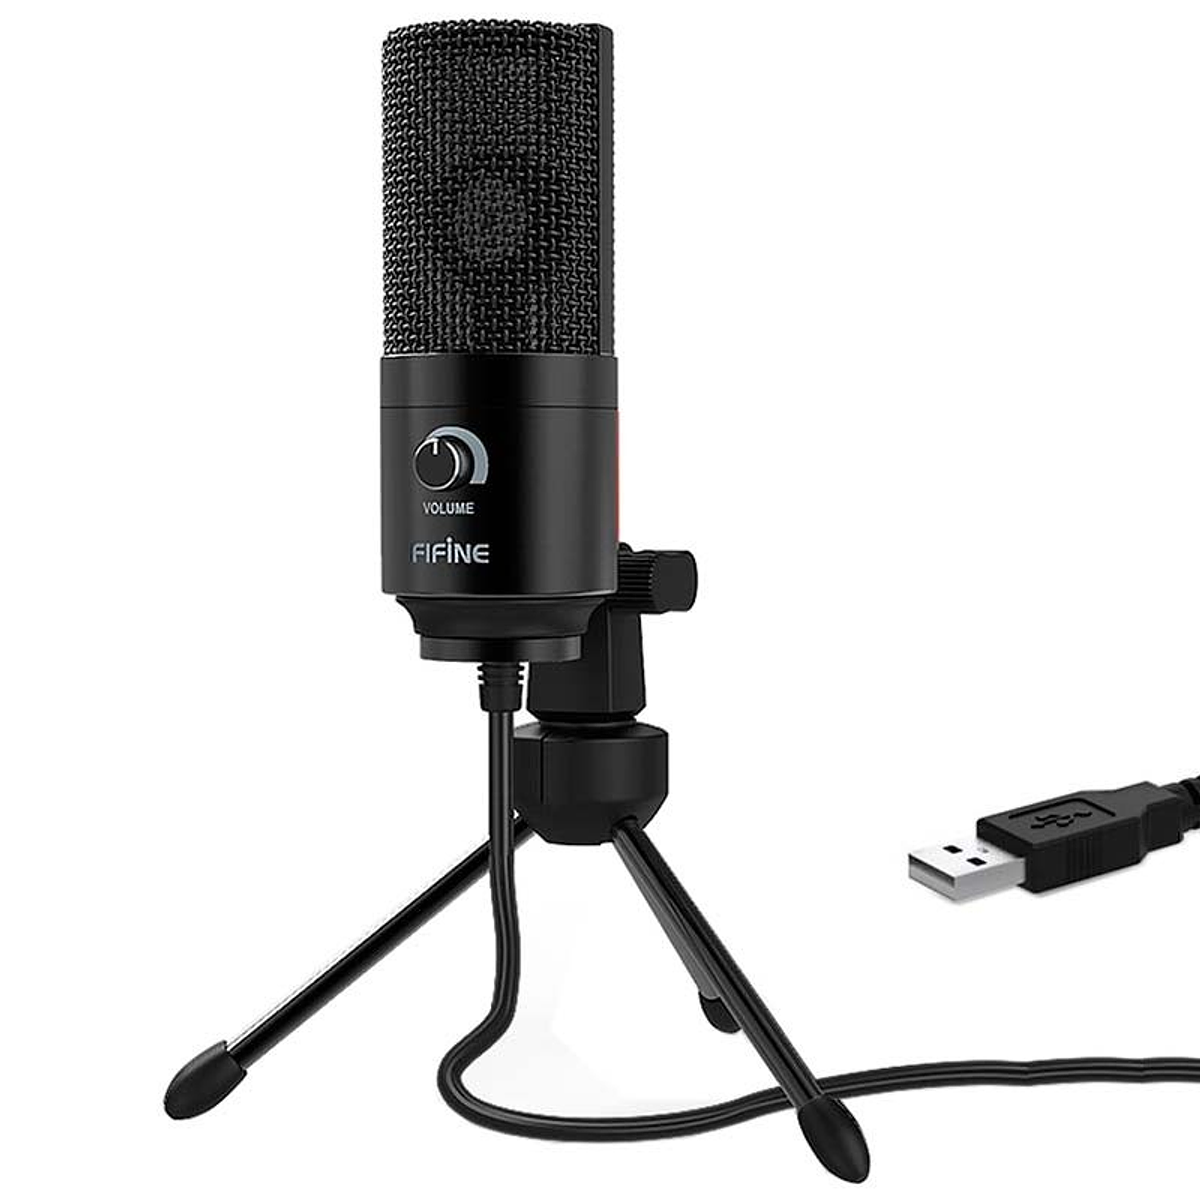 Fifine K669 USB Microphone Black for Recording and Streaming